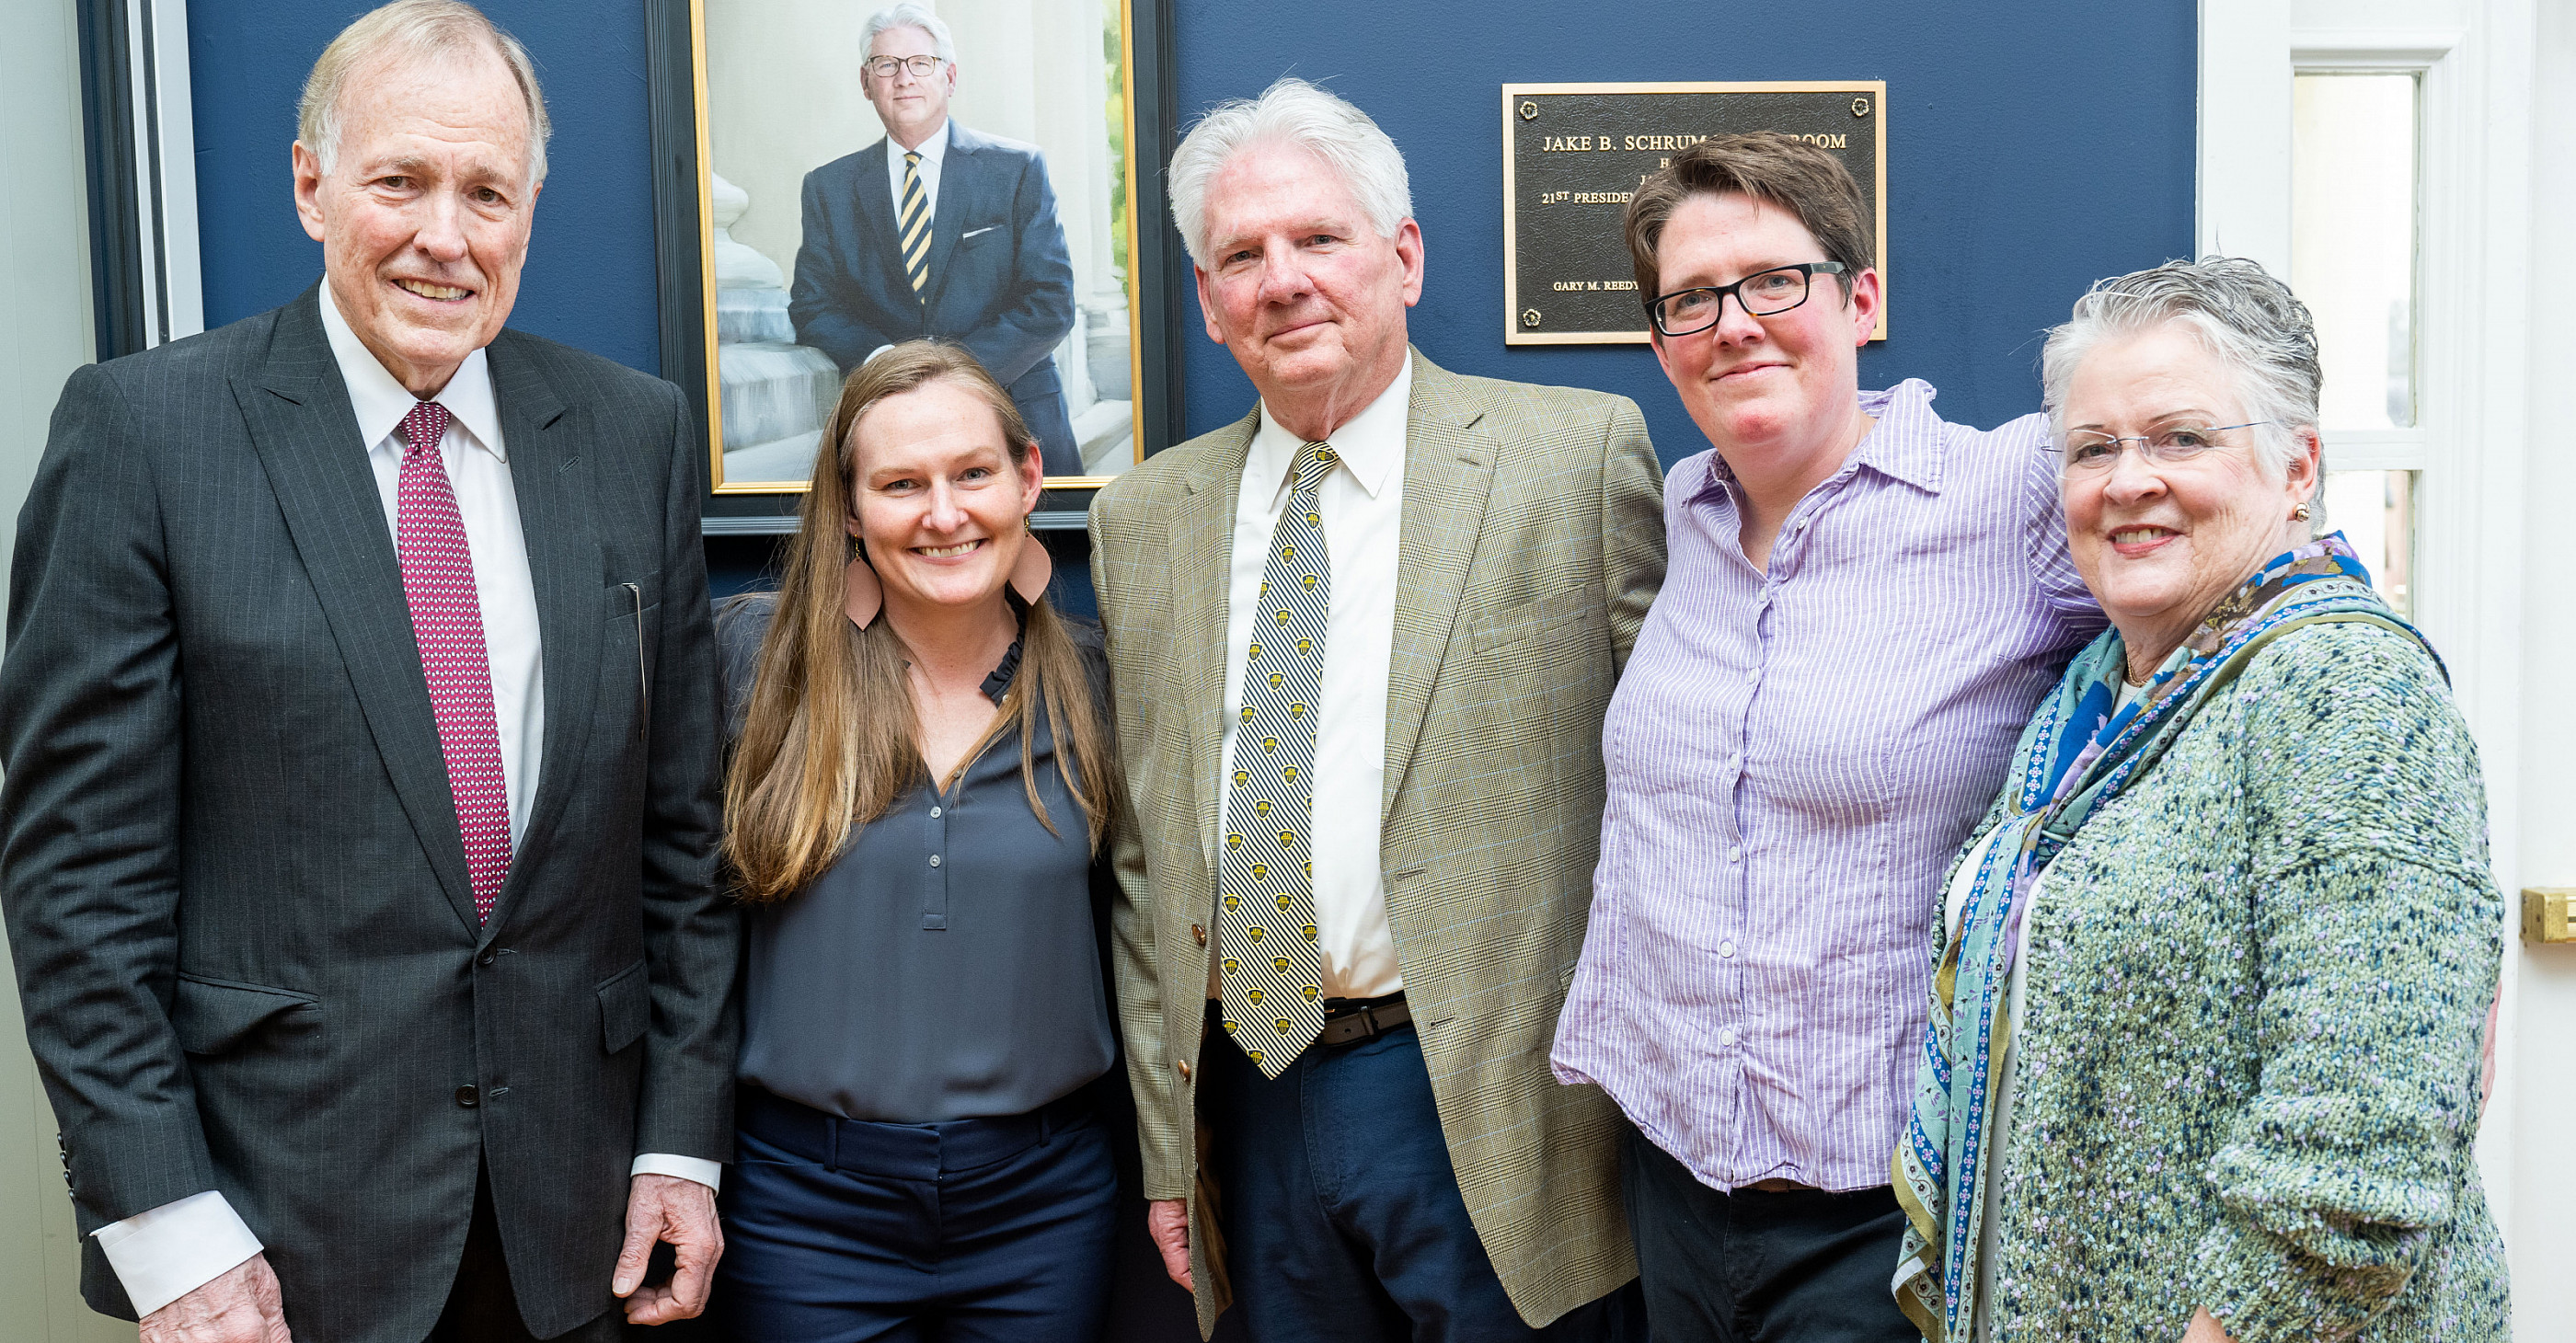 Donor and Life-long Friend, John Oden; daughter Katie Schrum; 21st President at Emory & Henry Jake B. Schrum; daughter Libby Schrum; ...